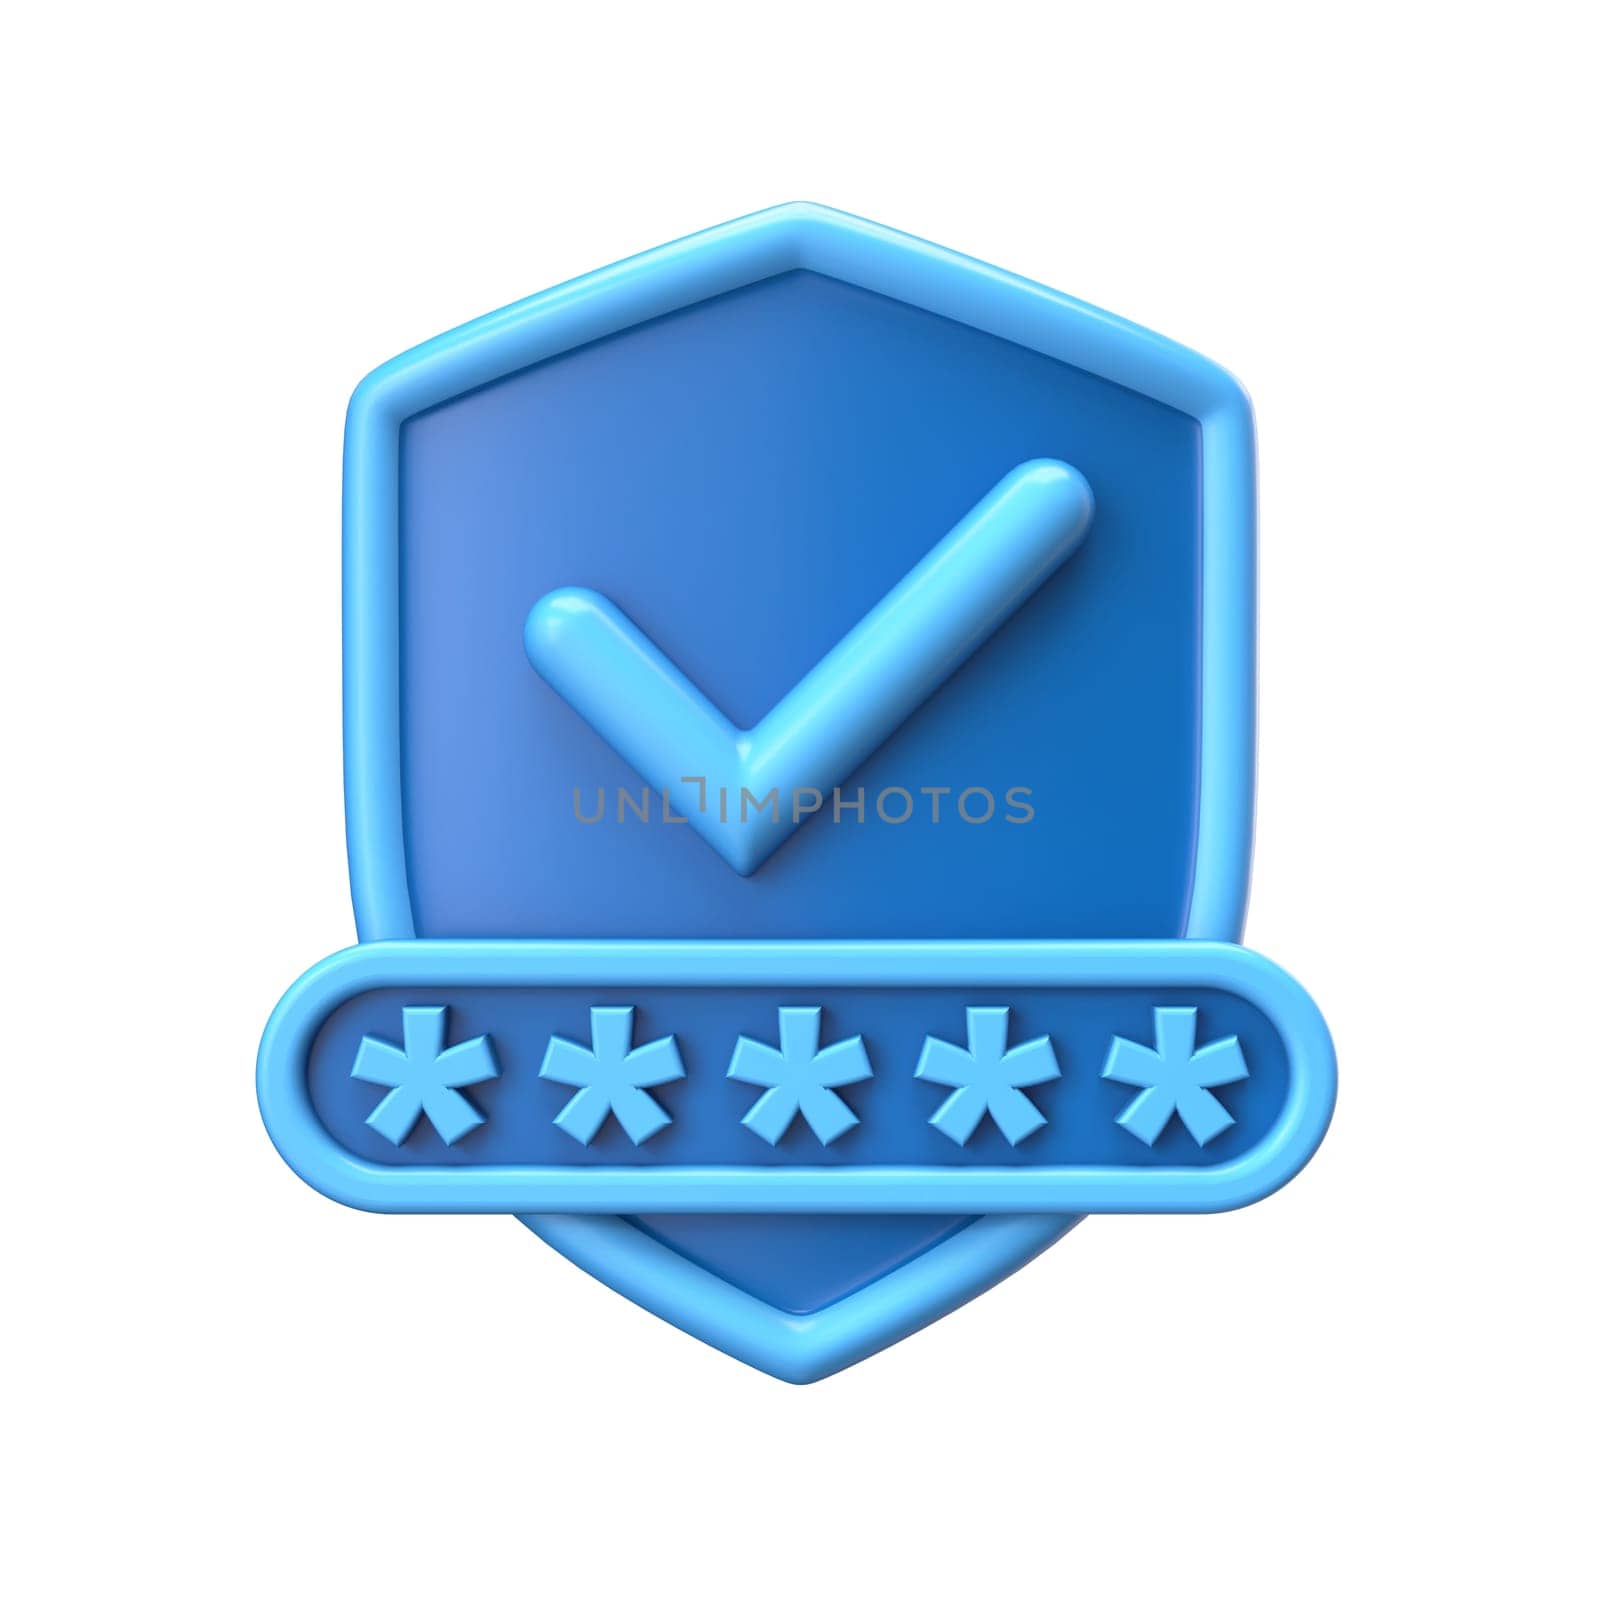 Blue shield with password field and check mark 3D rendering illustration isolated on white background